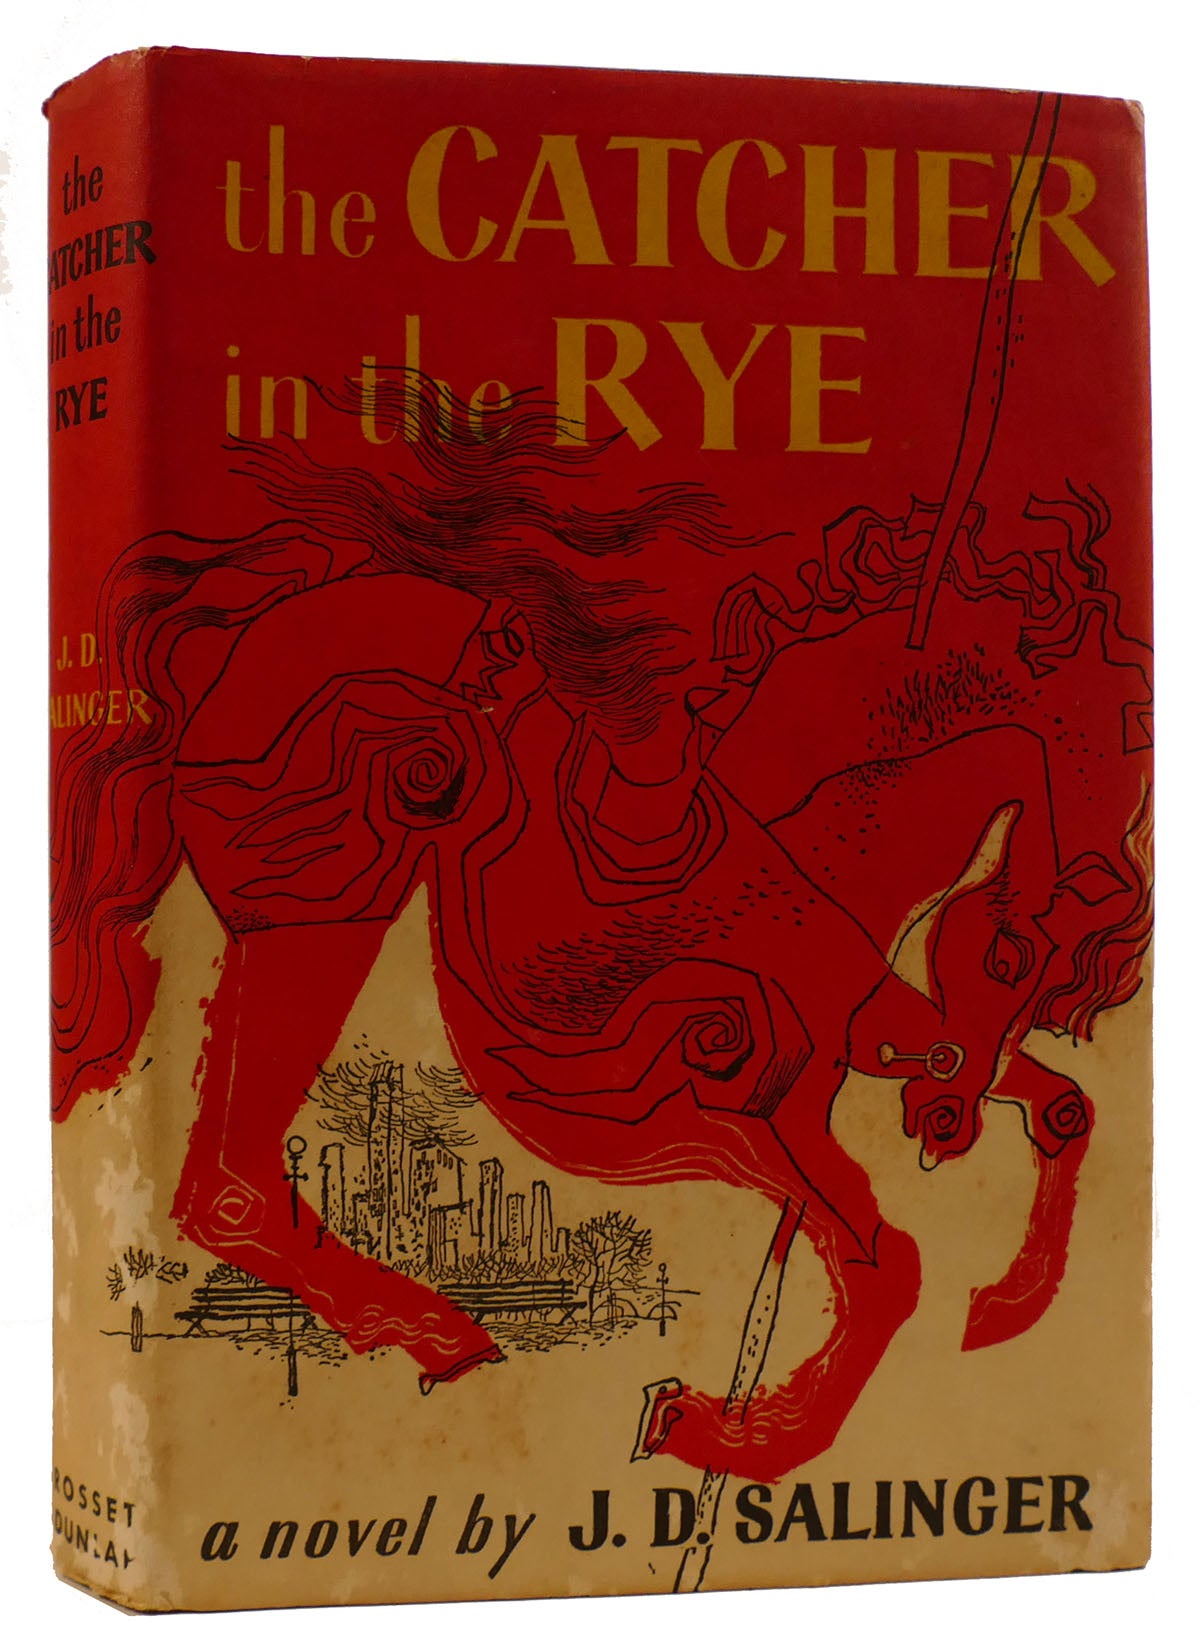 The Grosset & Dunlap edition of J.D. Salinger's The Catcher in the Rye.